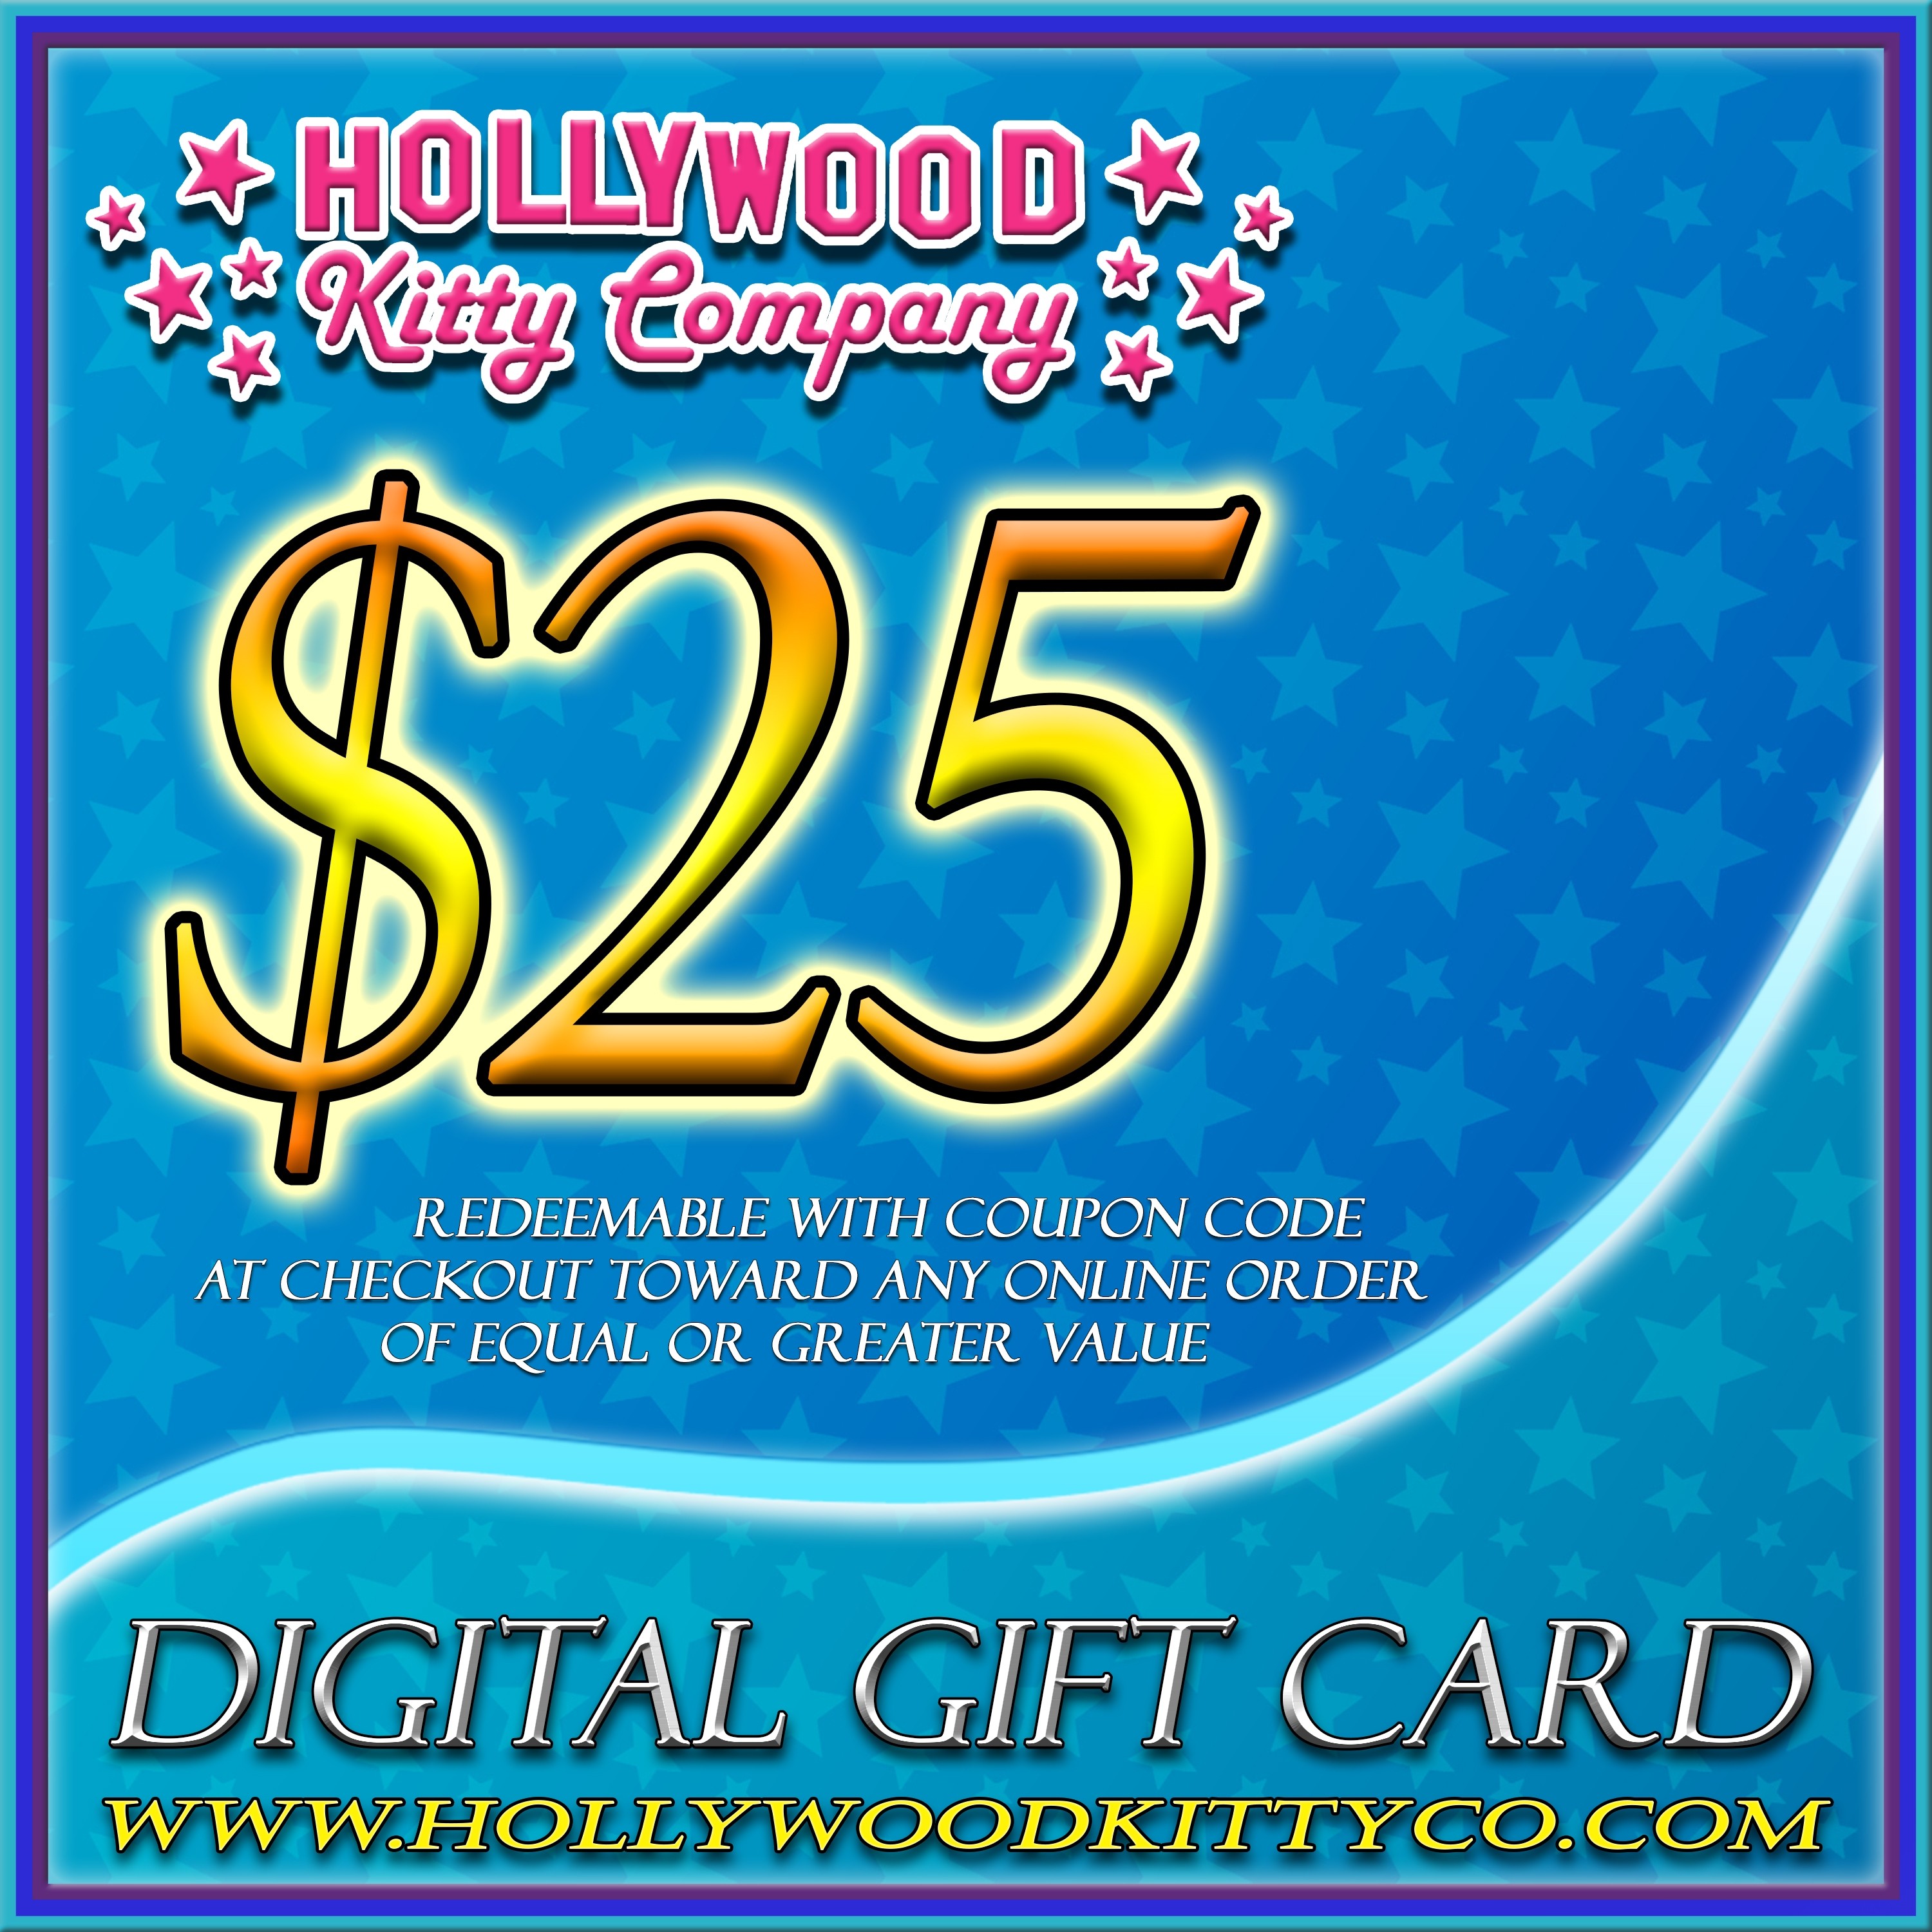 This image is intended for display in our online catalog only.  To see the "Digital Gift Card" image file you will receive to give to your recipient, see image 2.